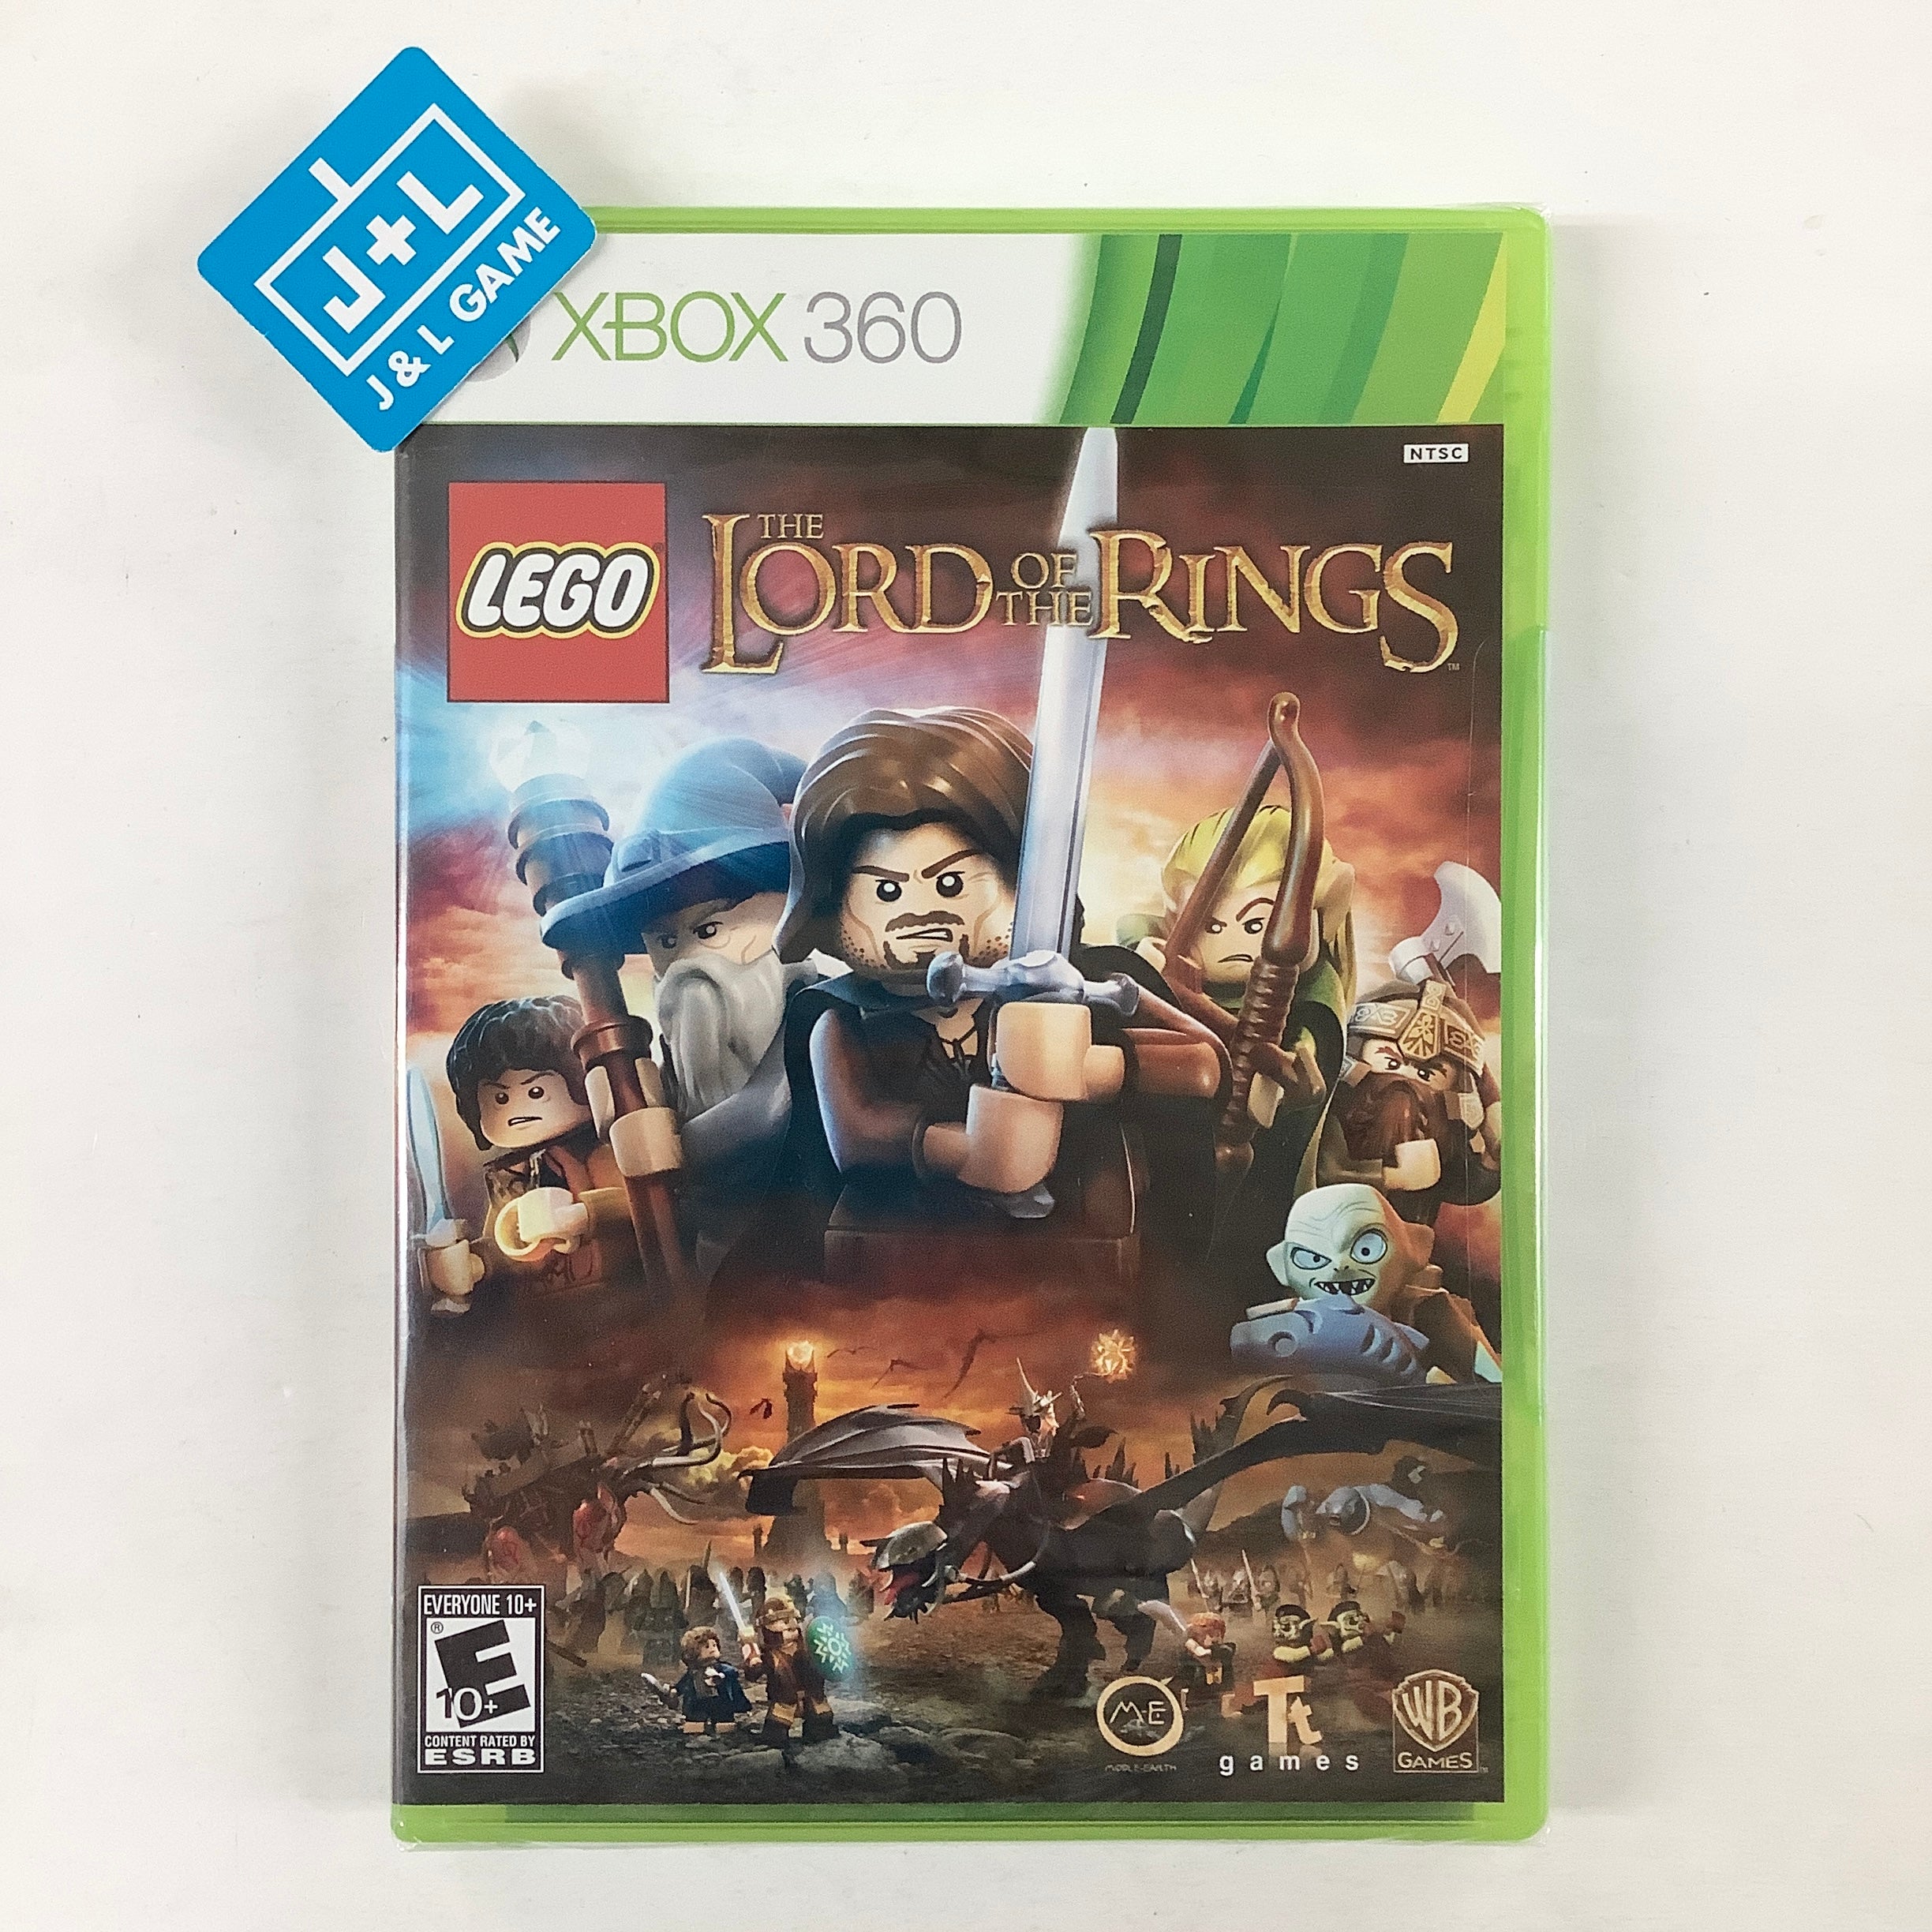 LEGO The Lord of the Rings - Xbox 360 Video Games Warner Bros. Interactive Entertainment   